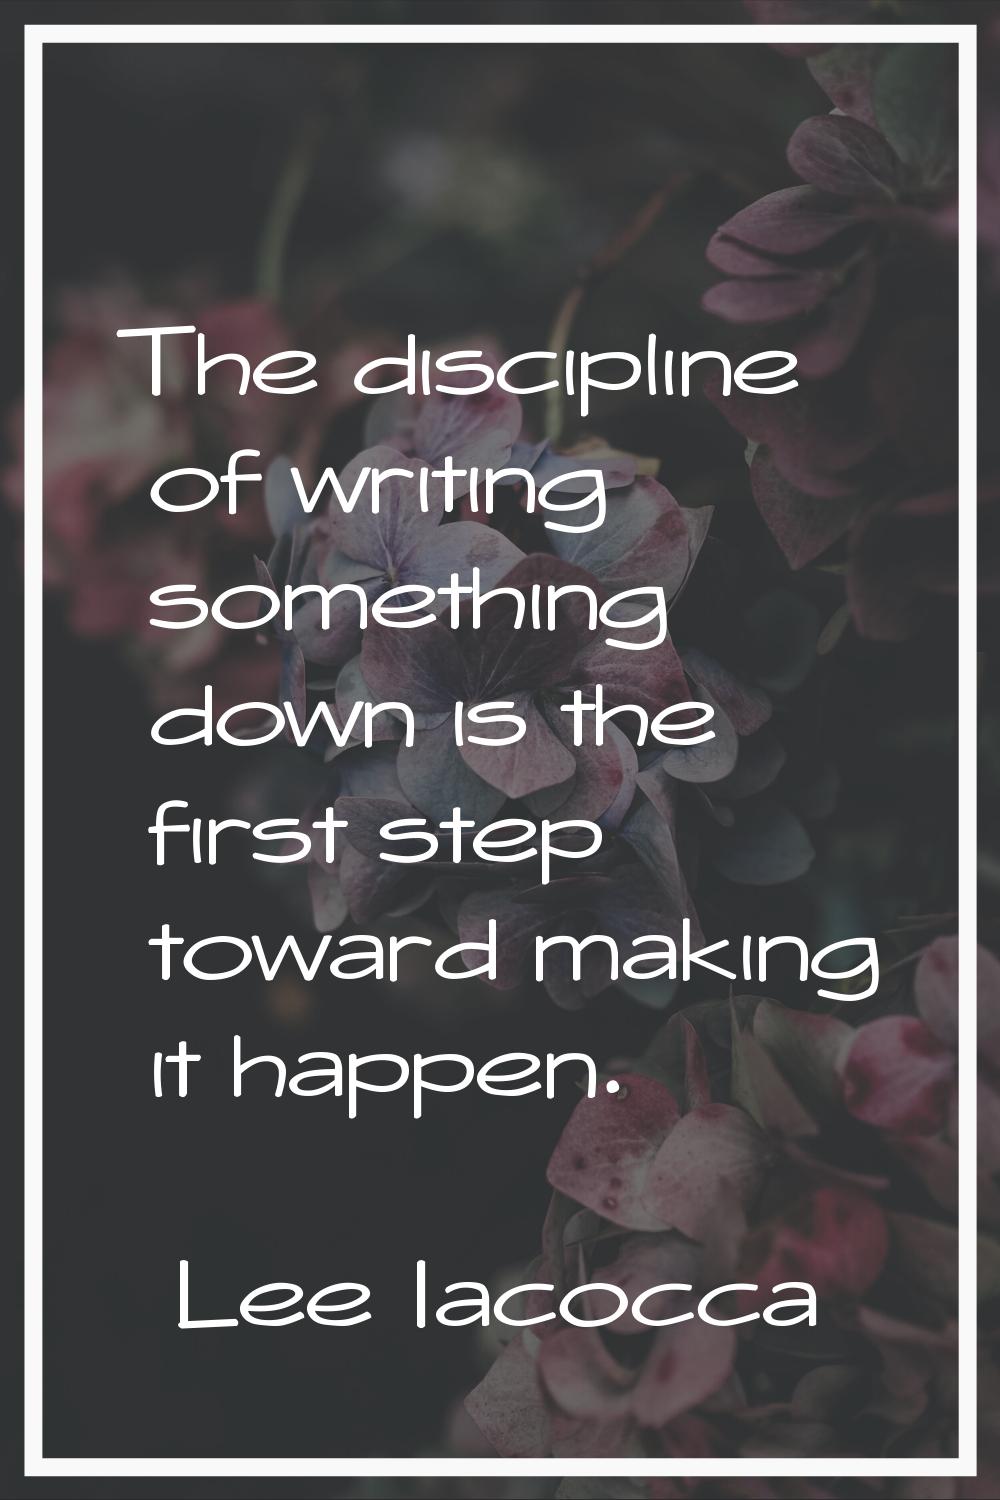 The discipline of writing something down is the first step toward making it happen.